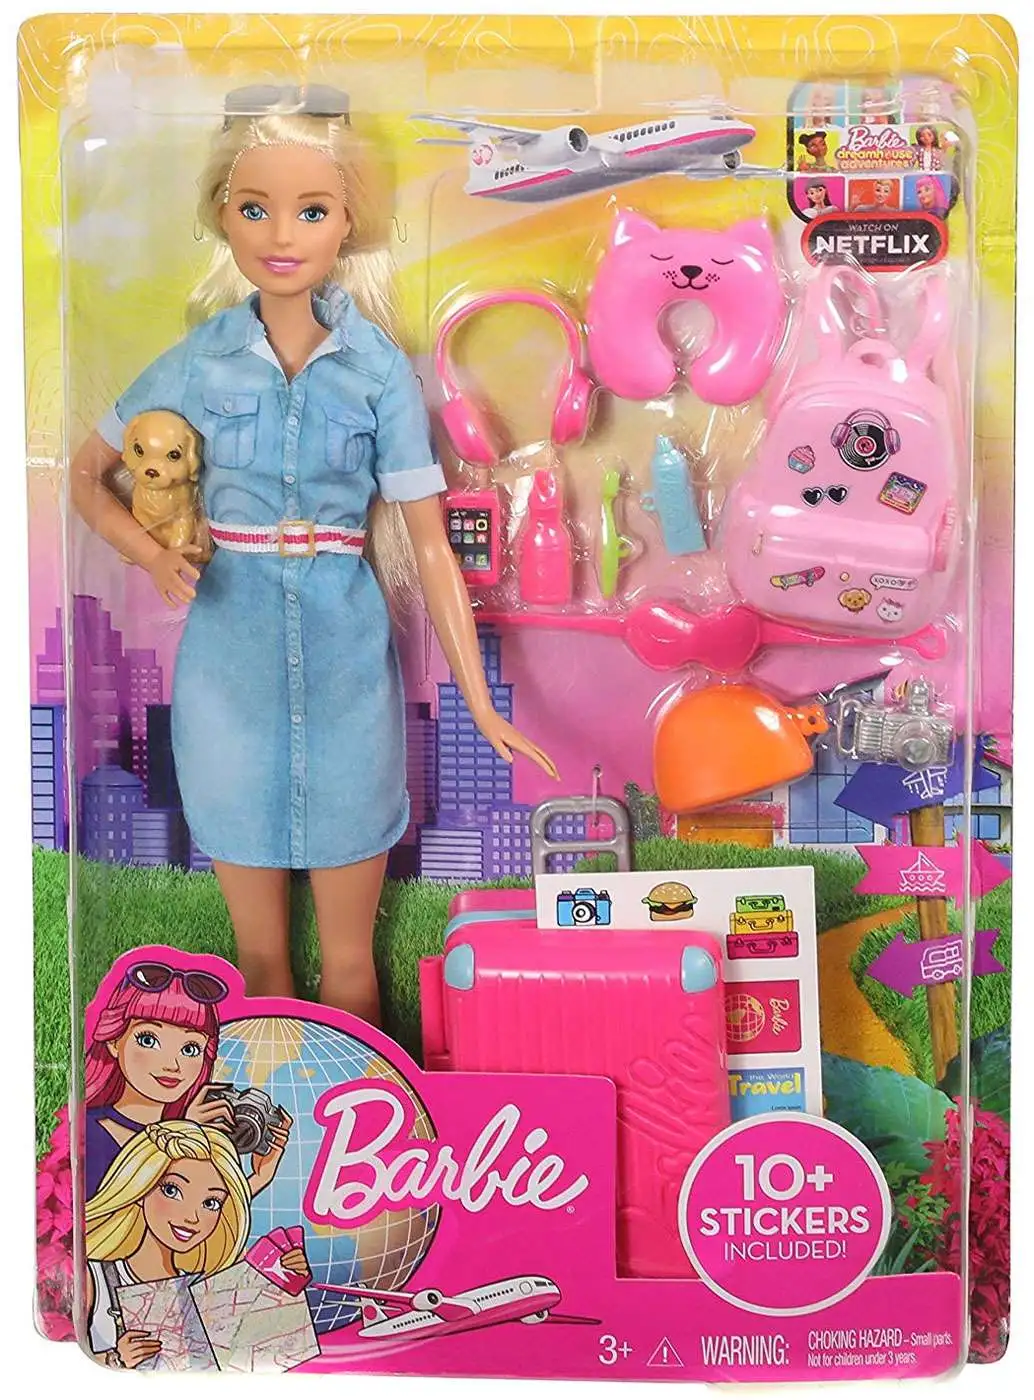  Barbie Dreamhouse With doll For Ages 3 years and up